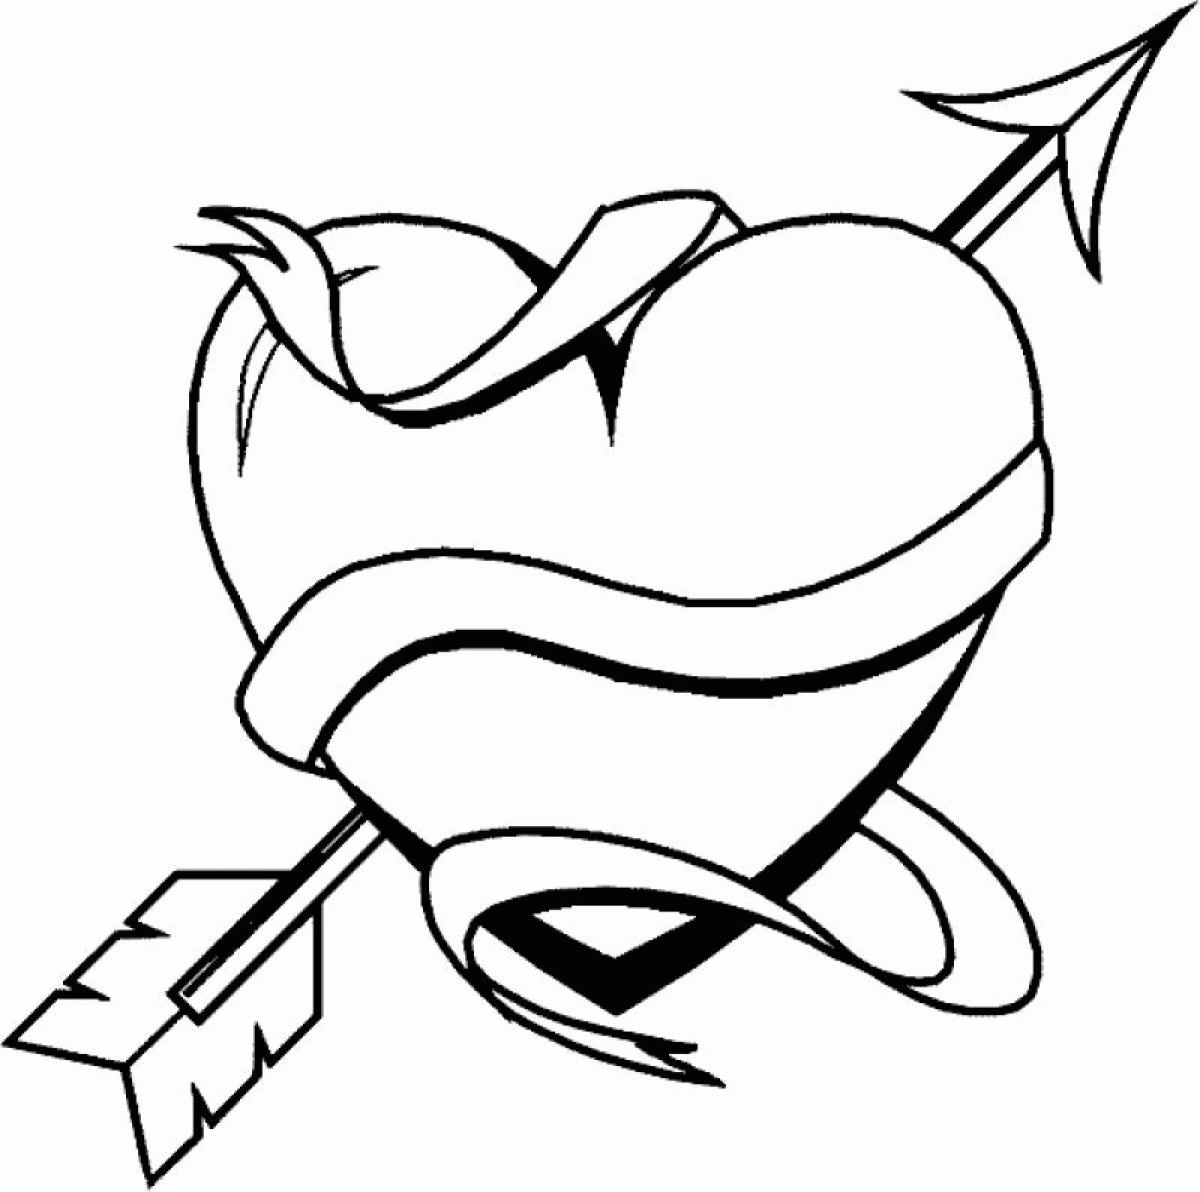 Graffiti Coloring Pages Coloring Pages For Kids - Gianfreda.net